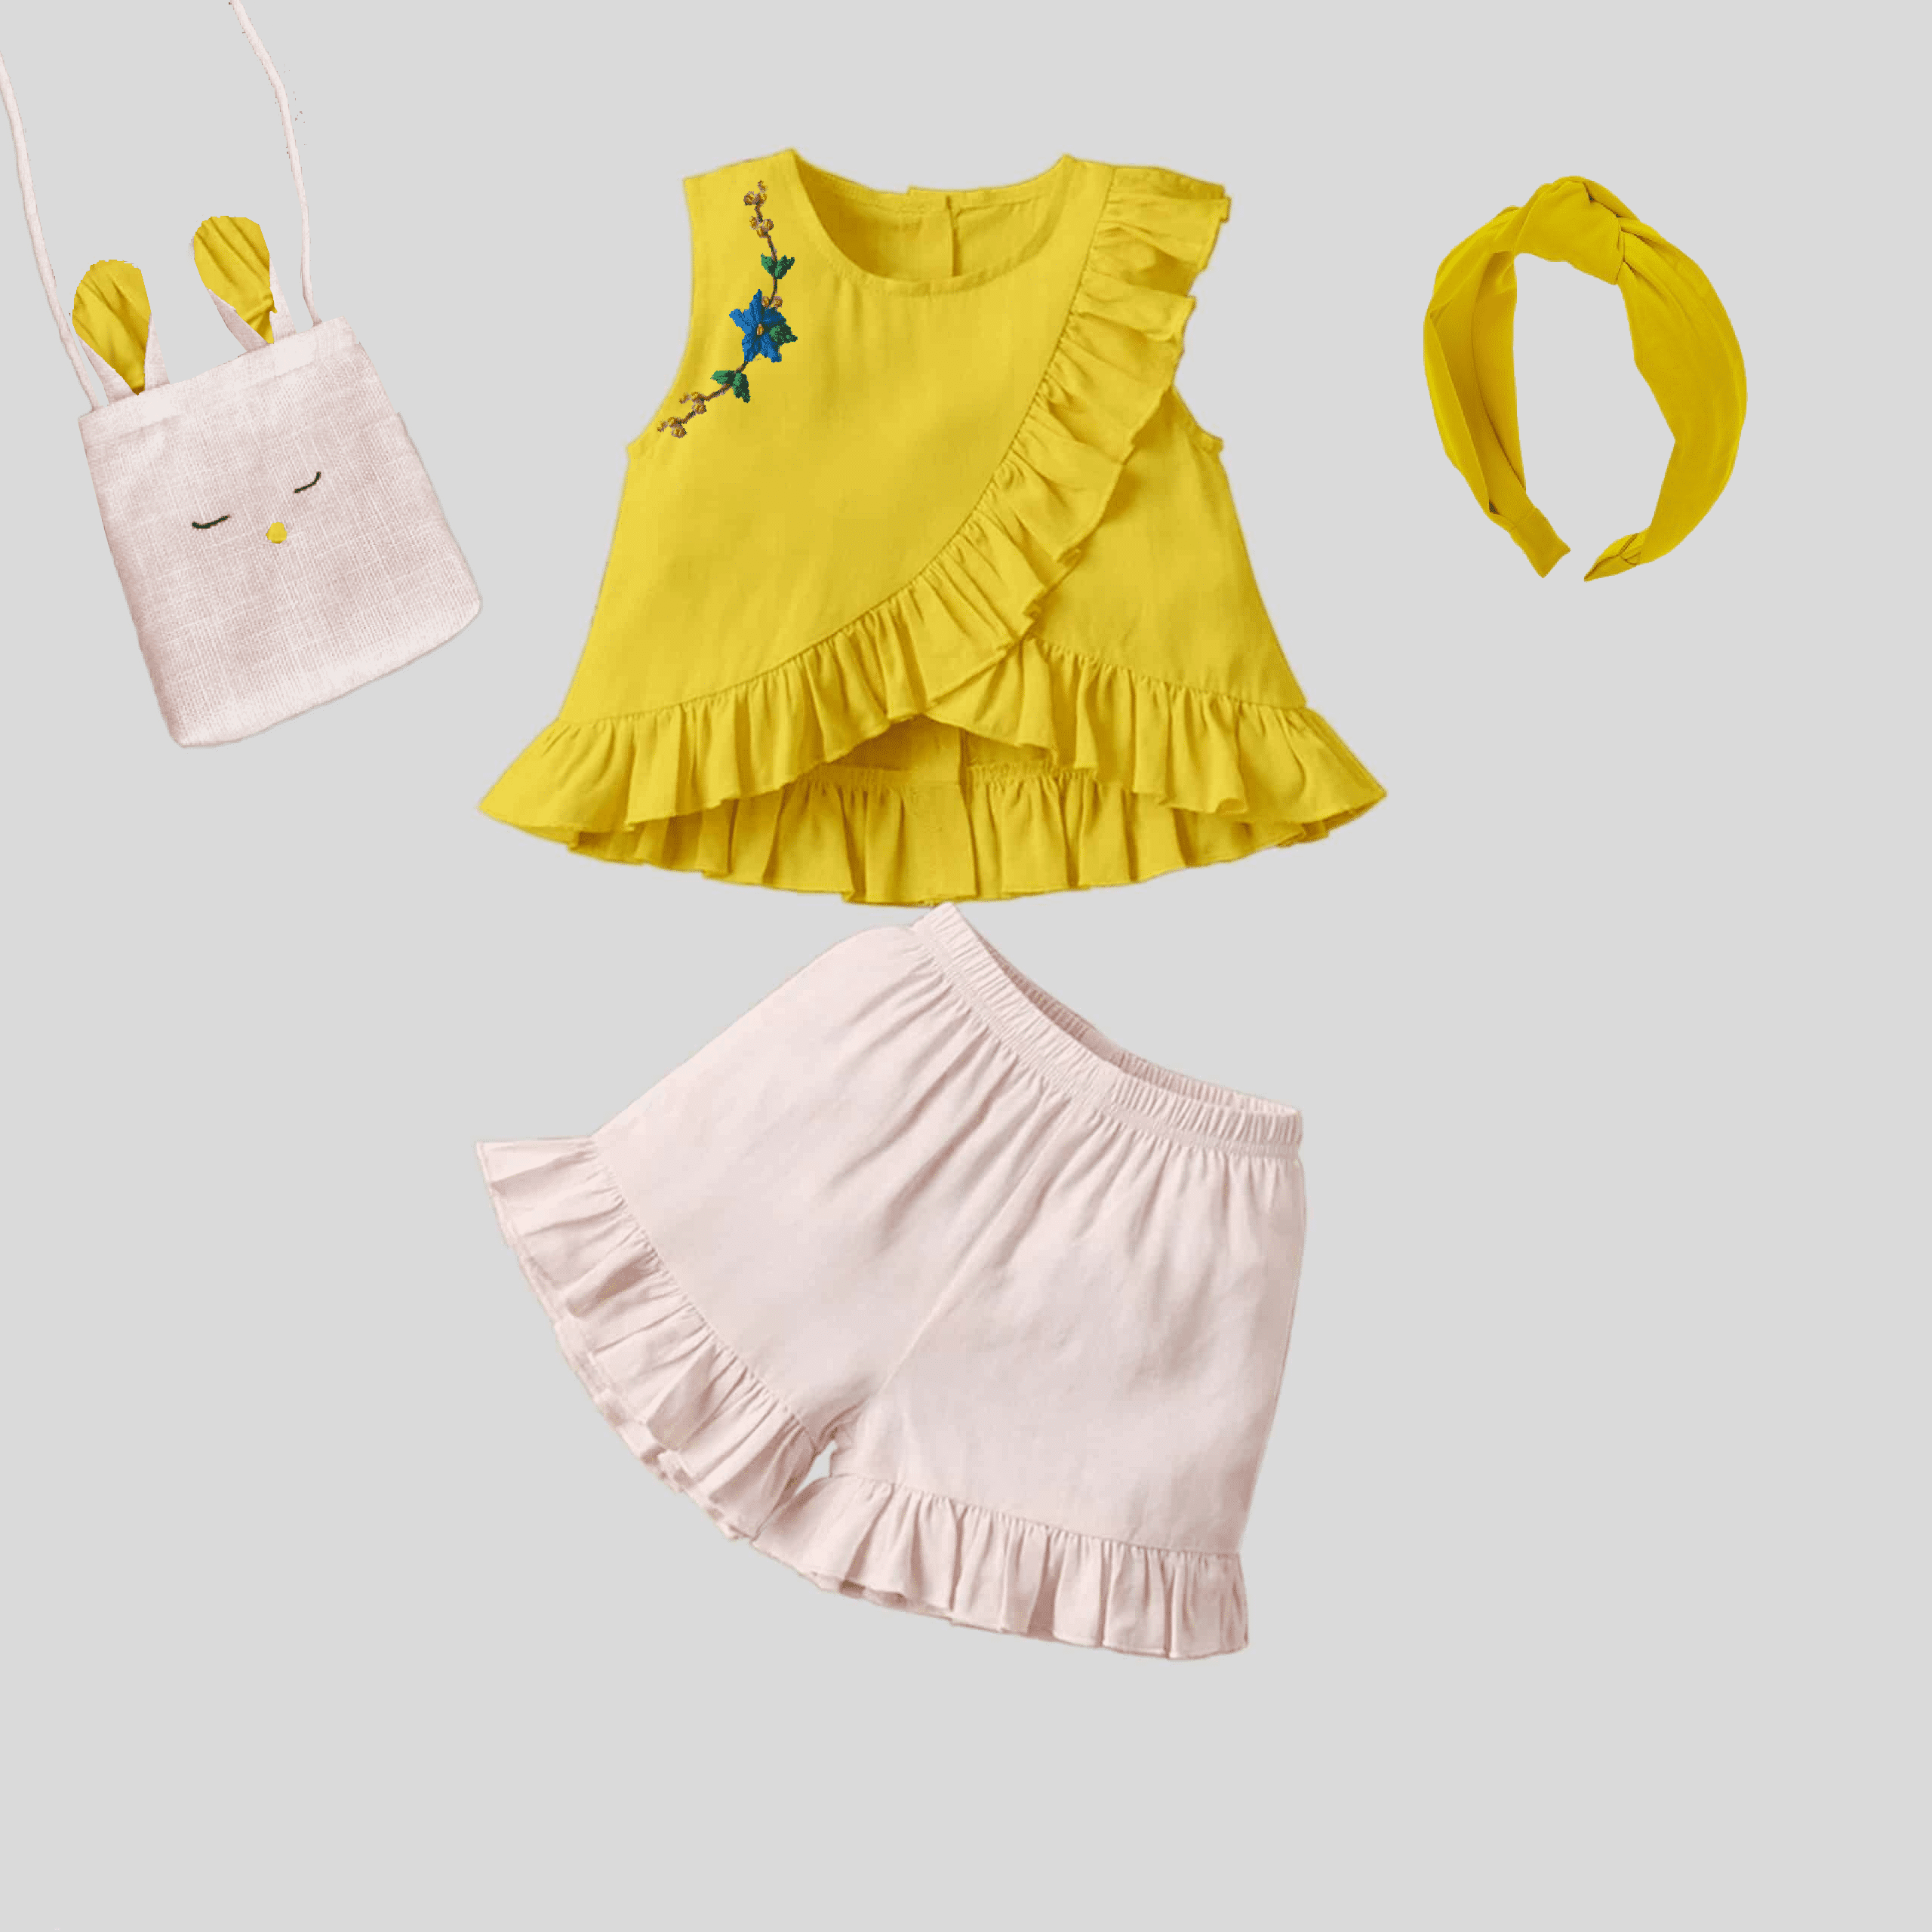 Girls sleeveless yellow top with cute frill detail and shorts set and free bag or hairband-RKFCW232